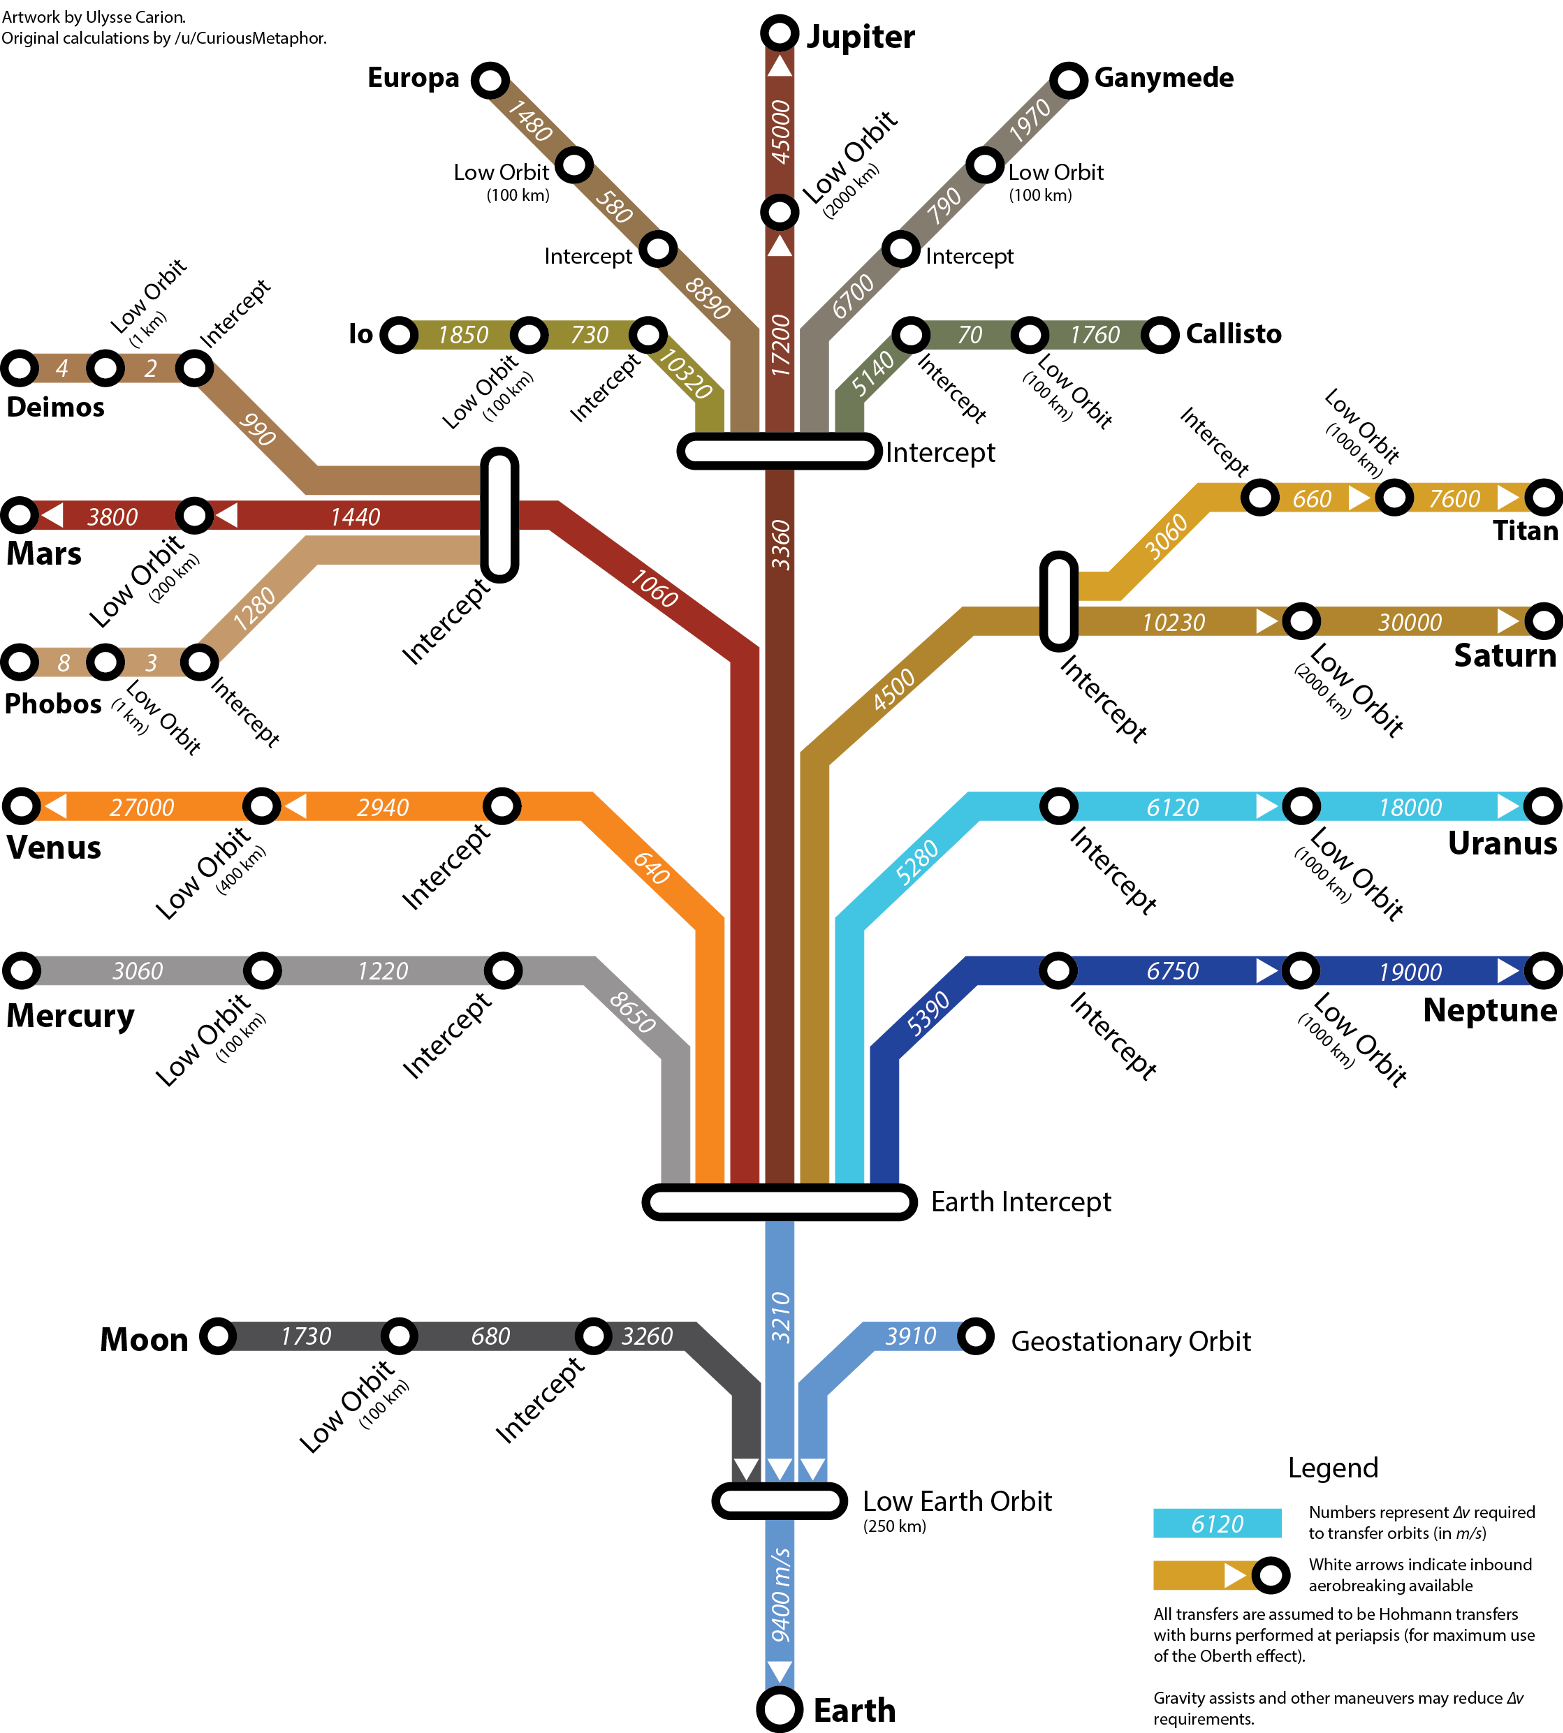 Enlarged view: The Solar System - A Subway Map ( CC BY-SA 3.0 by U. Carion via StackExchange)